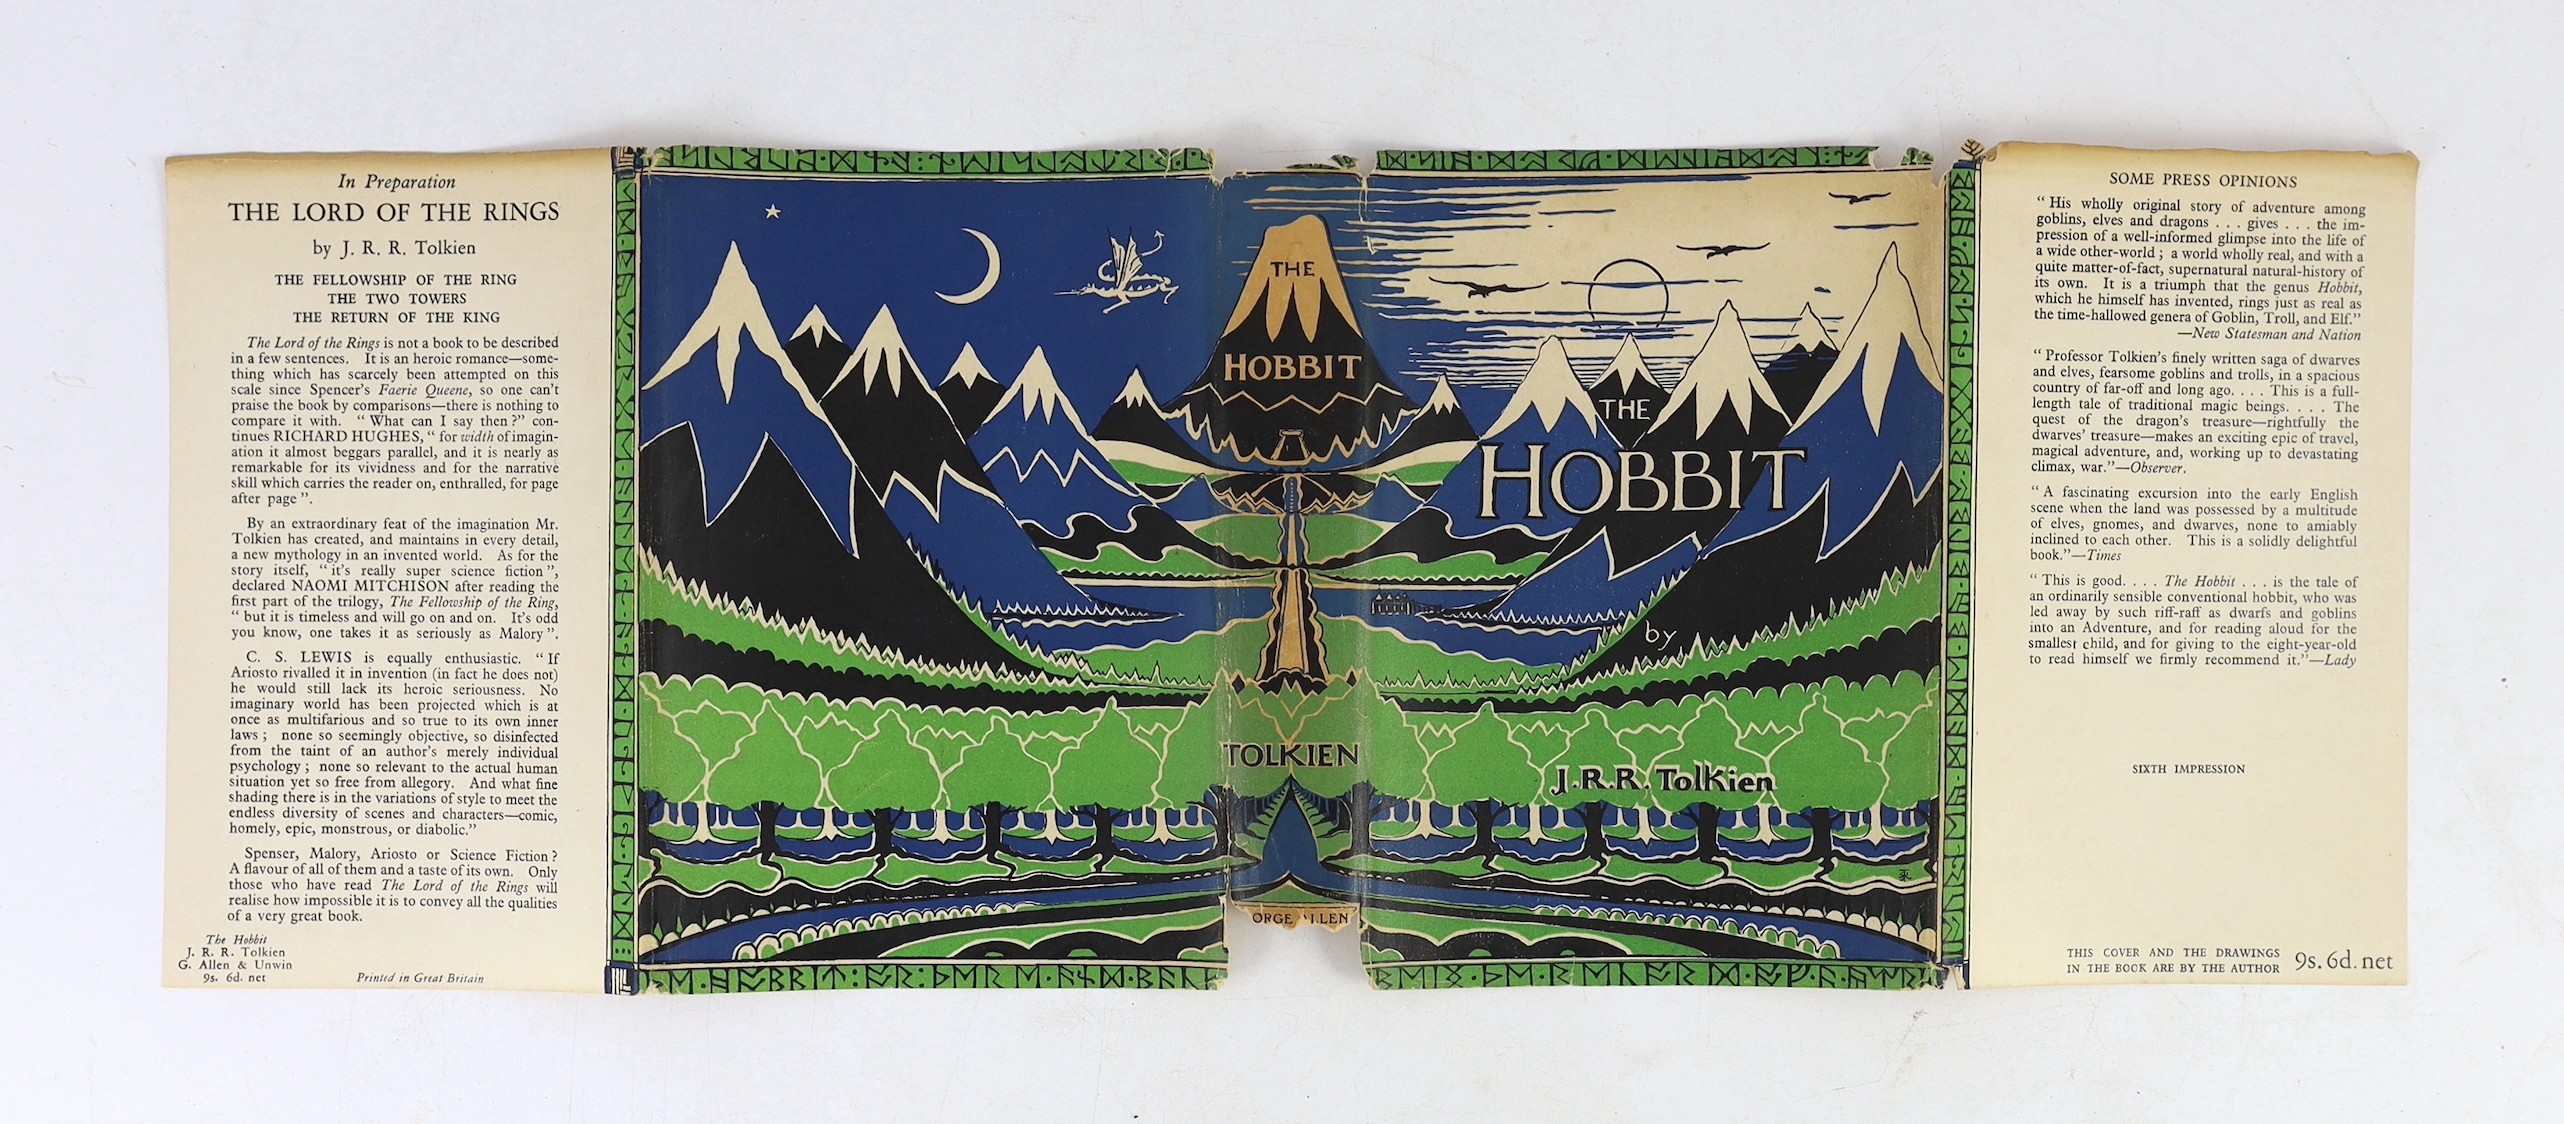 Tolkien, J.R.R. - The Hobbit or There and Back Again. Illustrated by the Author. 2nd edition, sixth impression. coloured frontis and 8 text illus. (7 full page), coloured maps on e/ps., half title; publisher's green clot